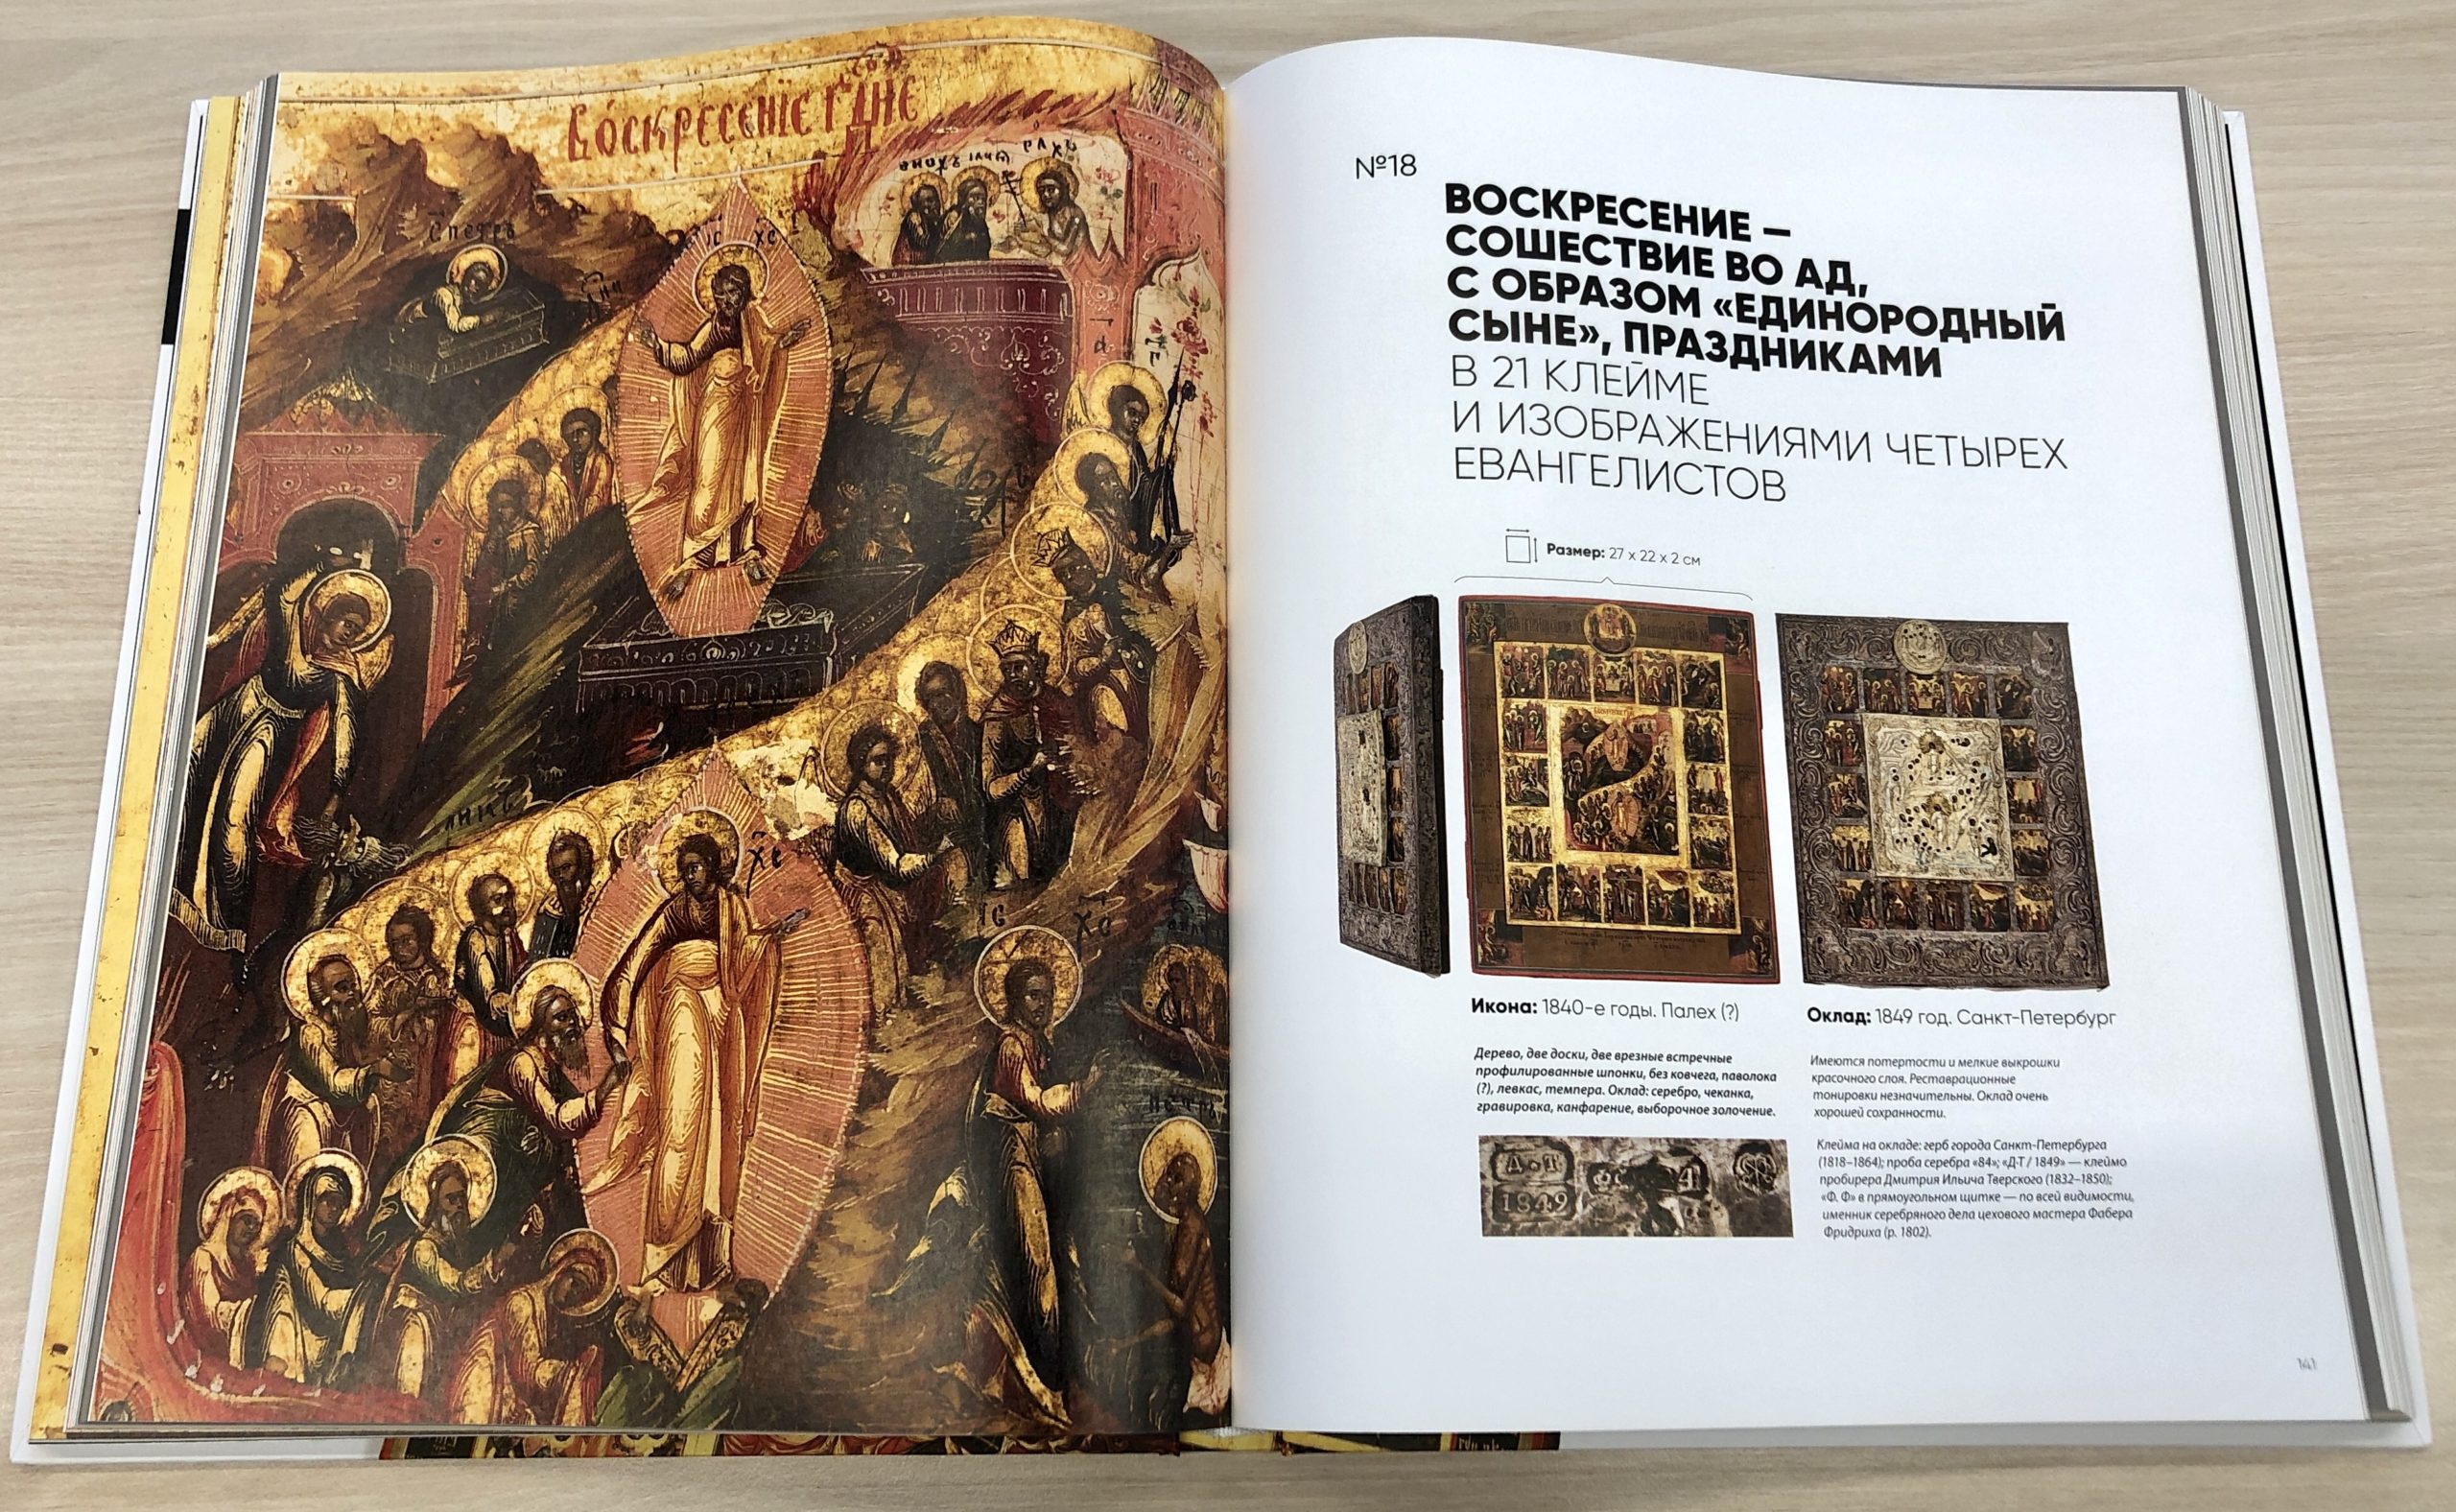 The First Scholarly Catalog of the Russian Icon Collection Released